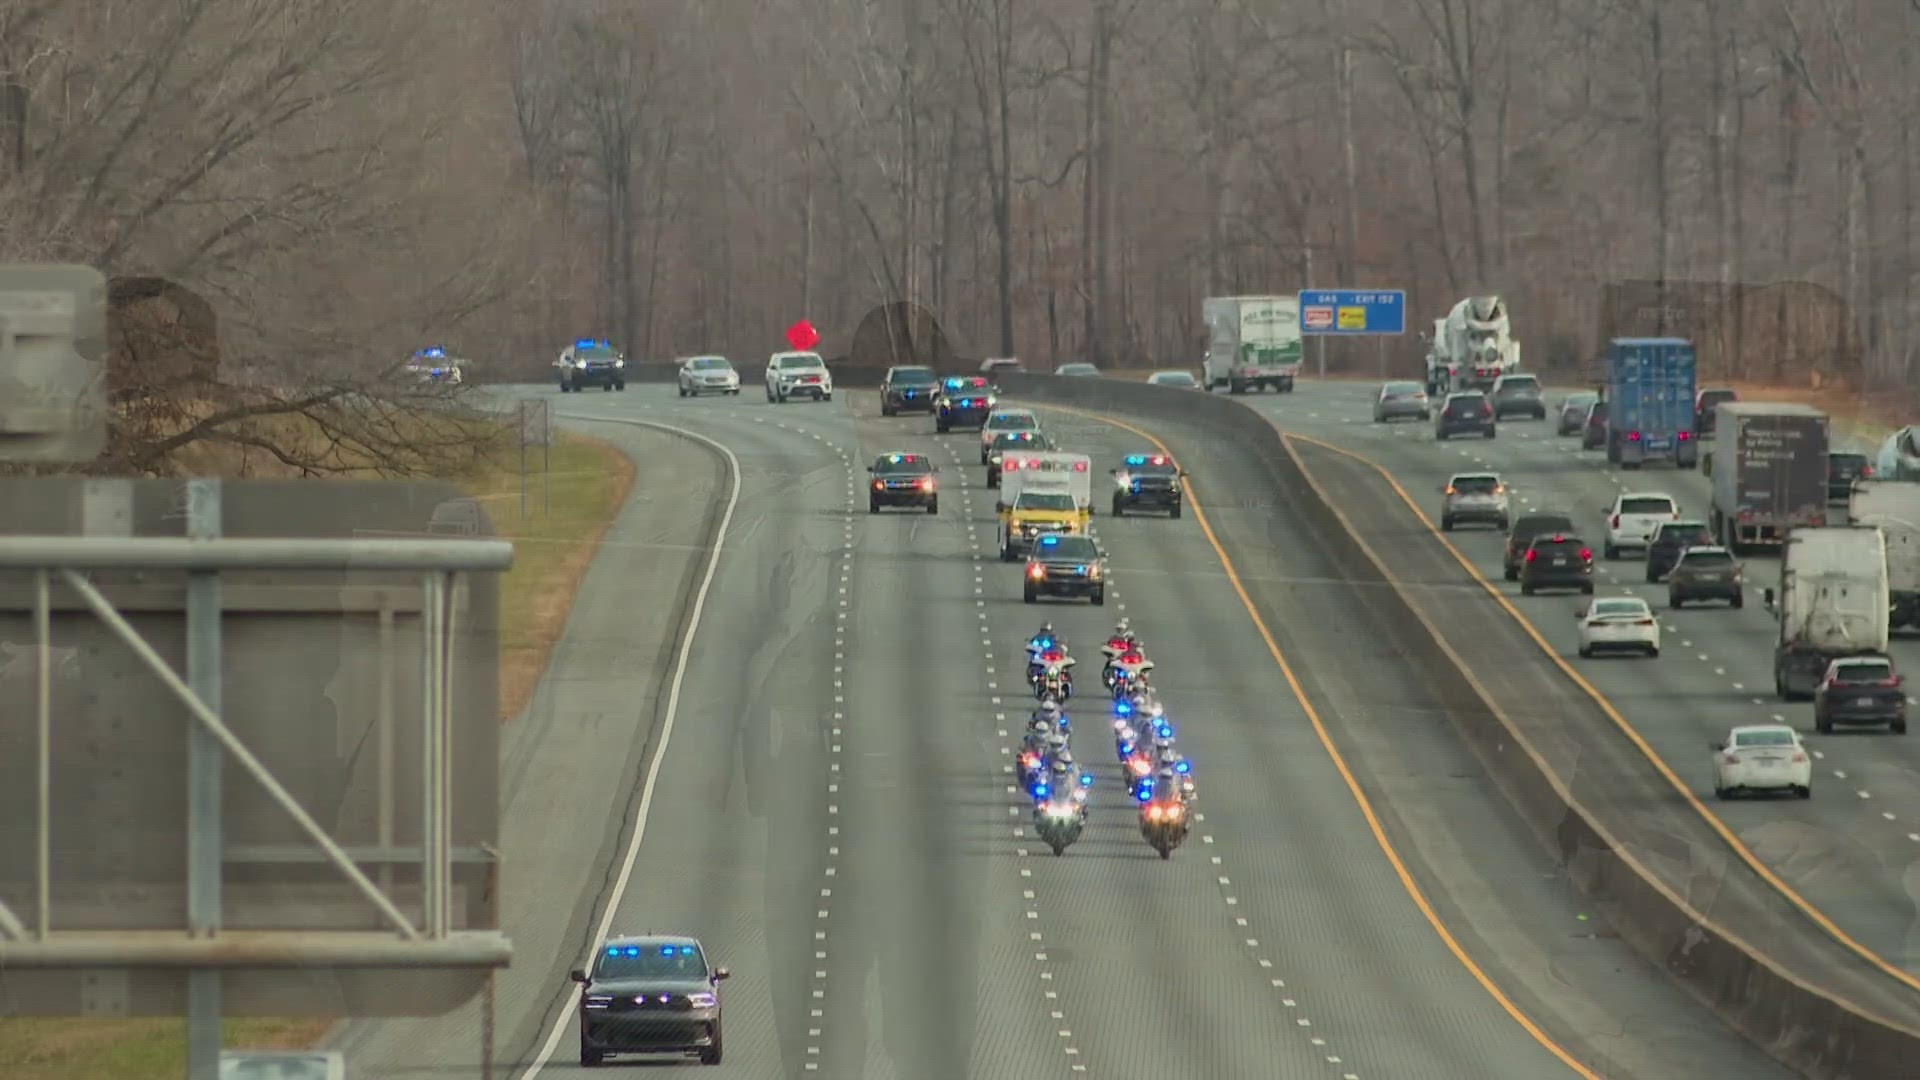 As Sgt. Nix's body returned home, people watched from overpasses as law enforcement escorted him from Raleigh.